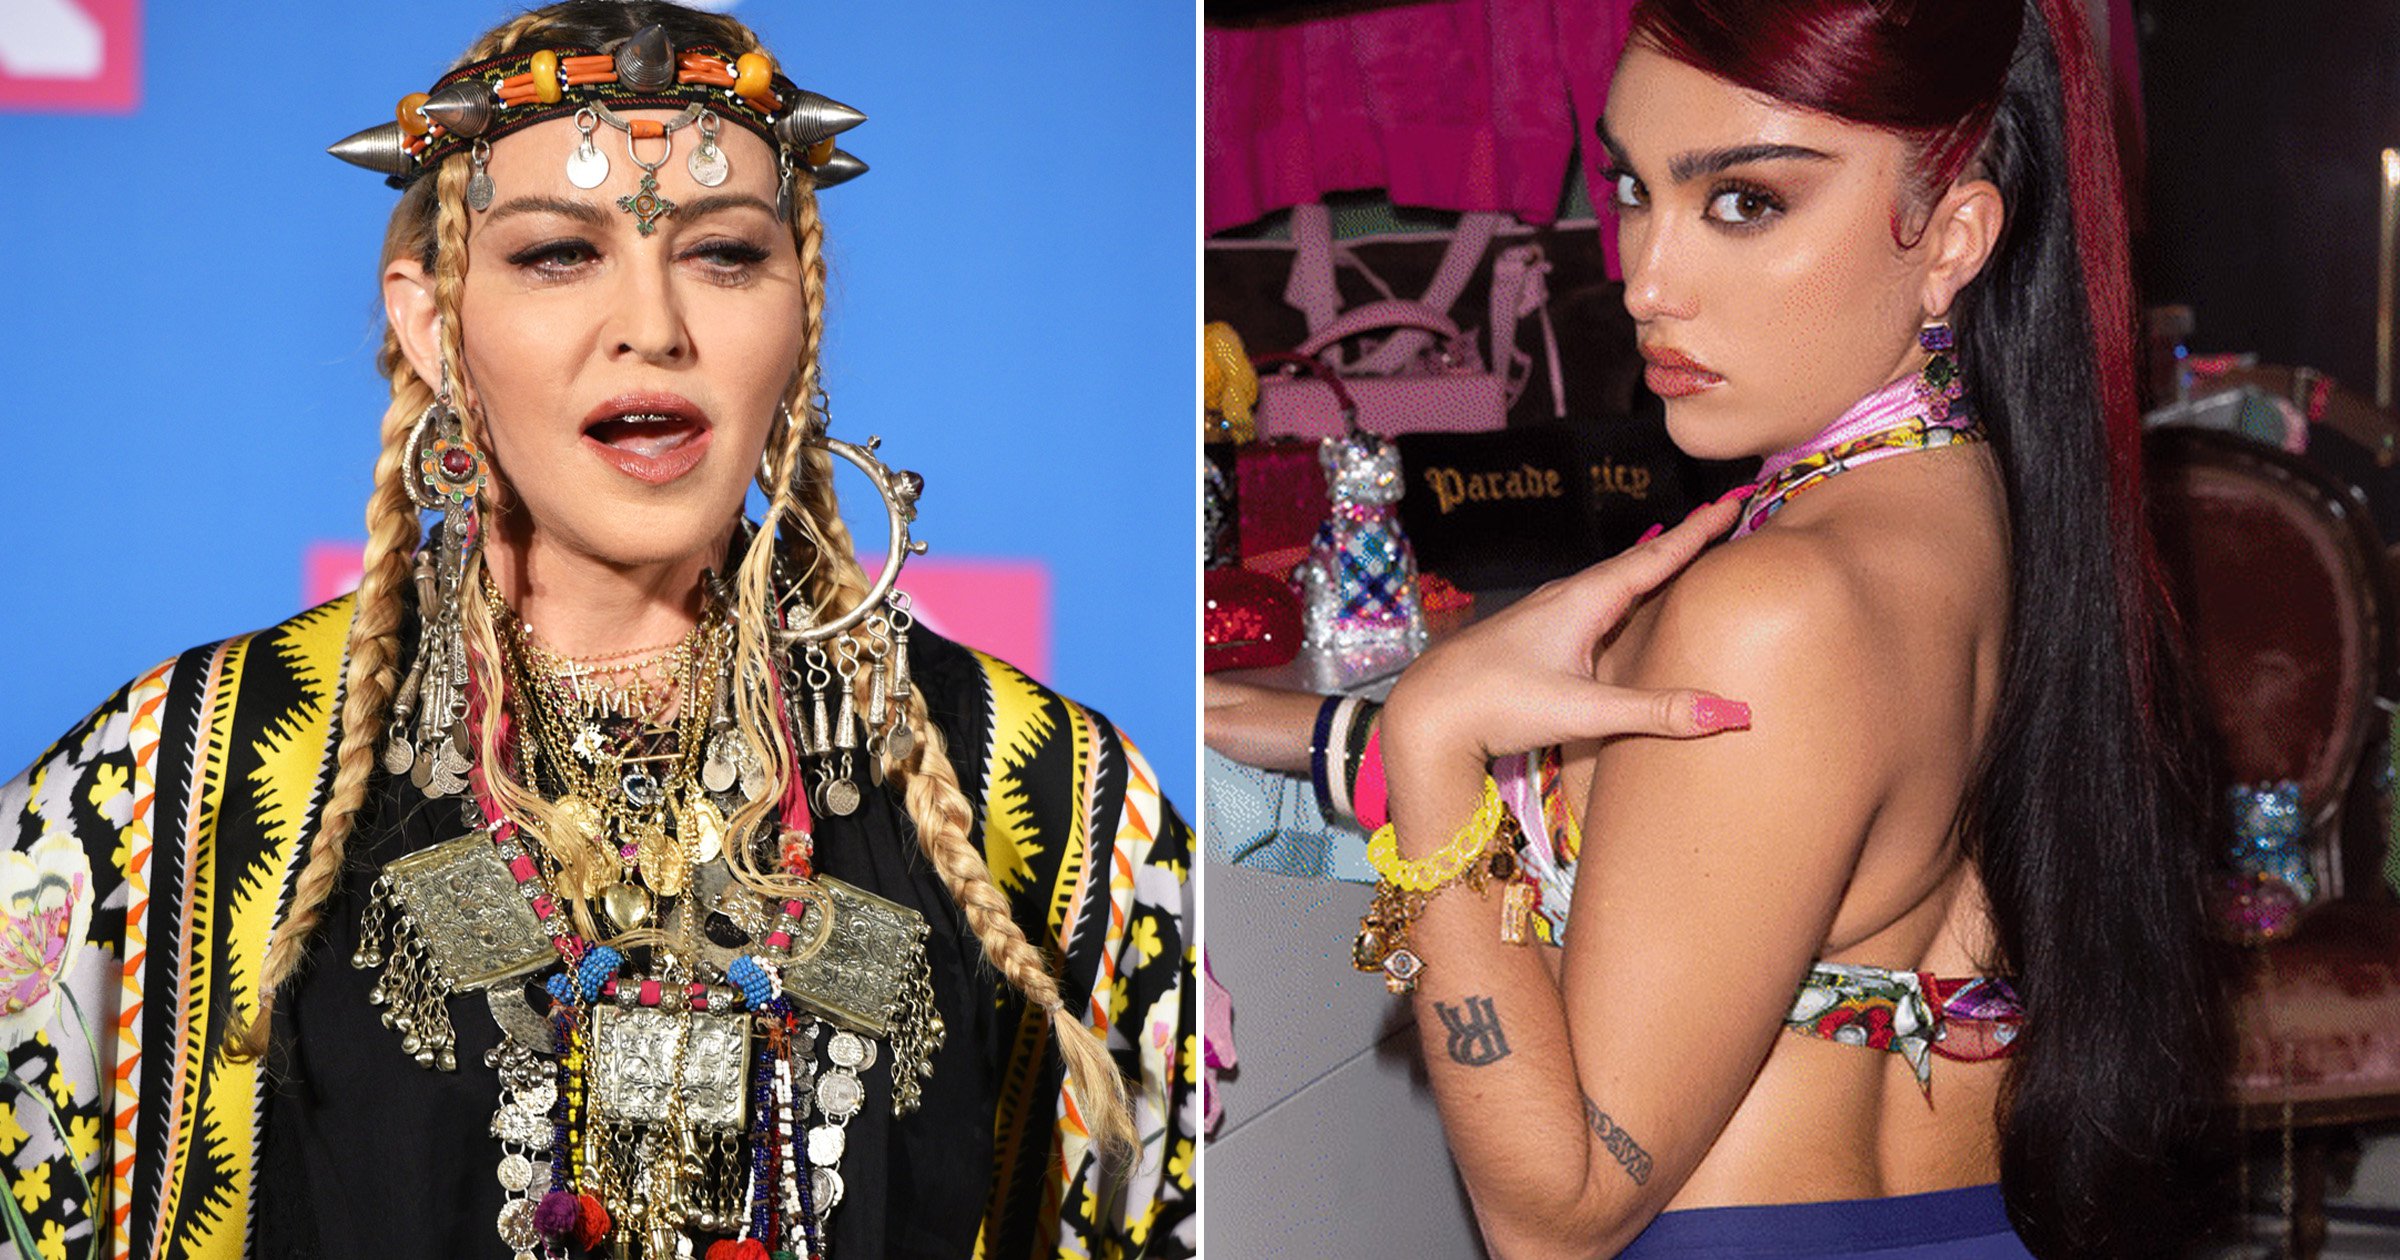 Madonna’s daughter Lourdes claps back at haters as she makes Instagram debut with iconic thirst traps